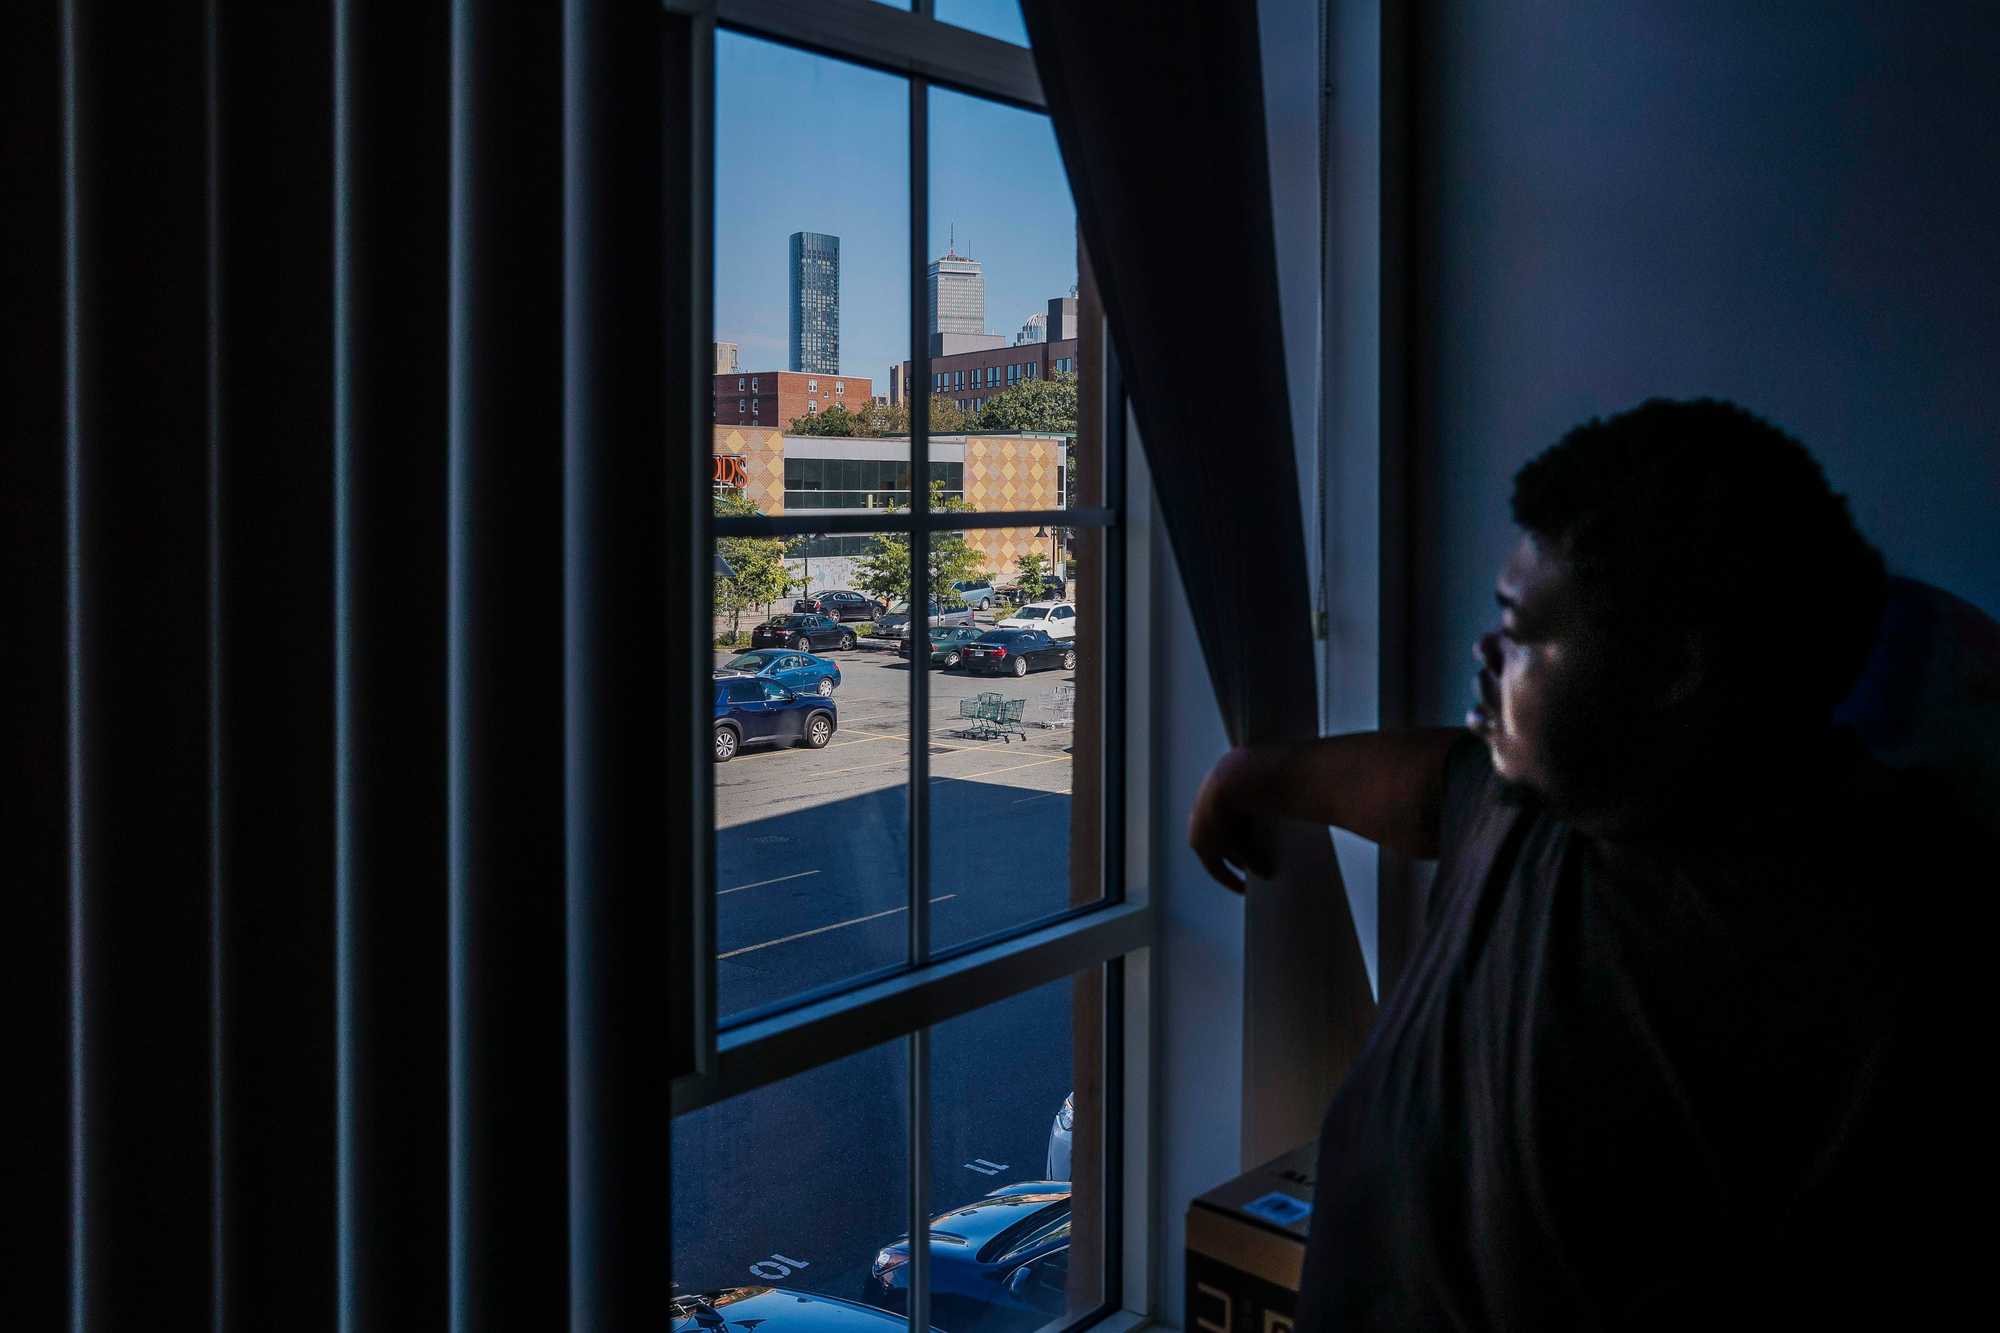 Looking out the window of his apartment in Roxbury’s Nubian Square, Alonzo White can see the Four Seasons One Dalton soaring into the sky. White, his mother, and a younger brother rent the three-bedroom apartment, one of 28 affordable units whose creation was funded by One Dalton’s developer in a set-aside agreement.